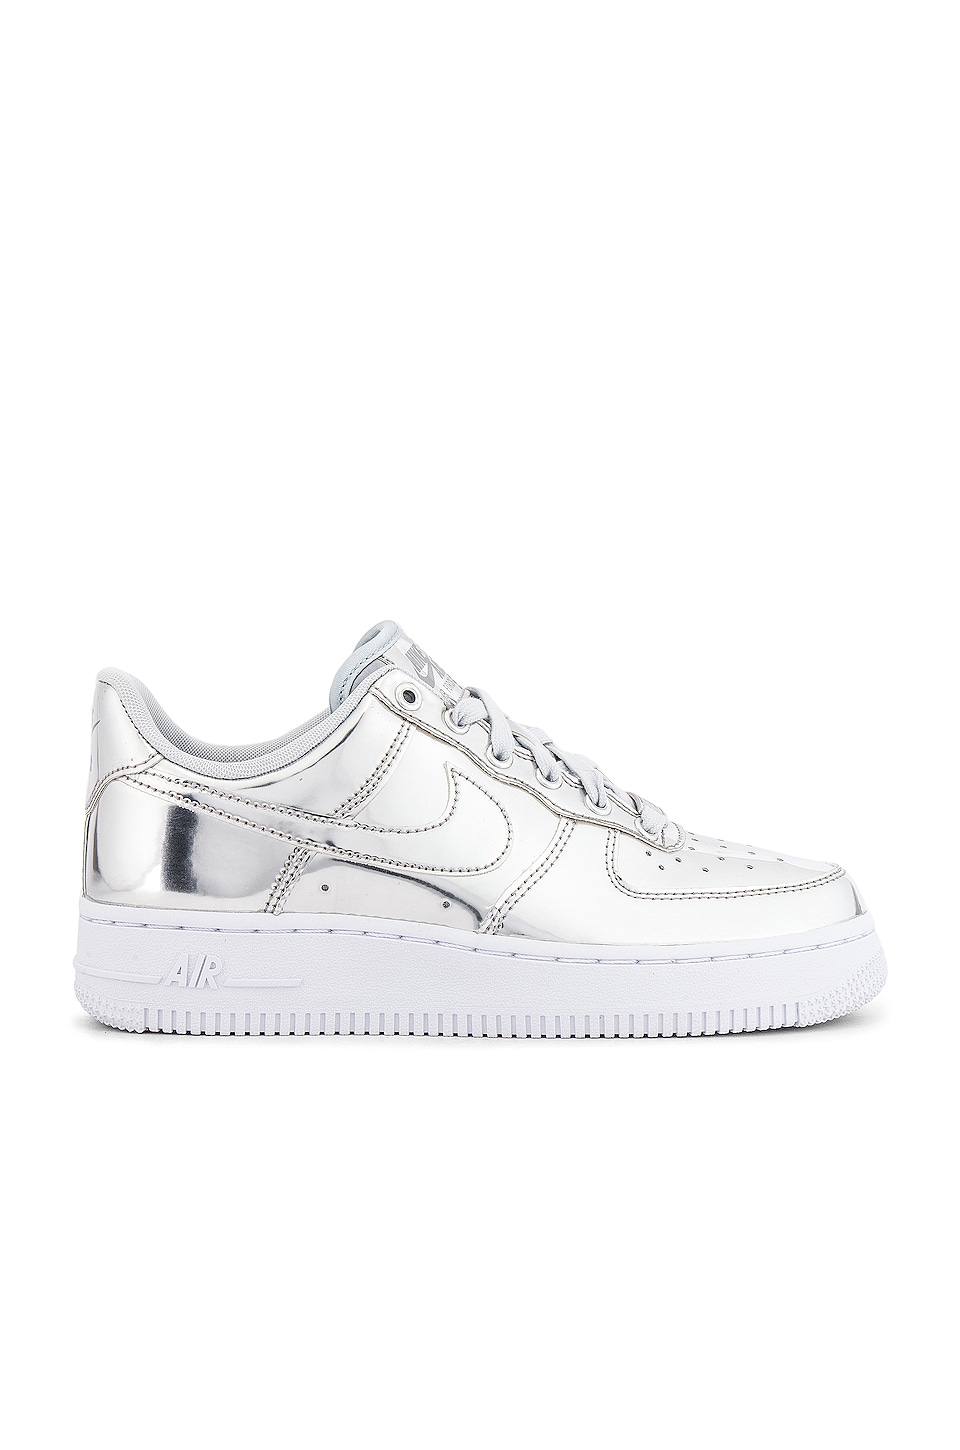 silver air force 1s